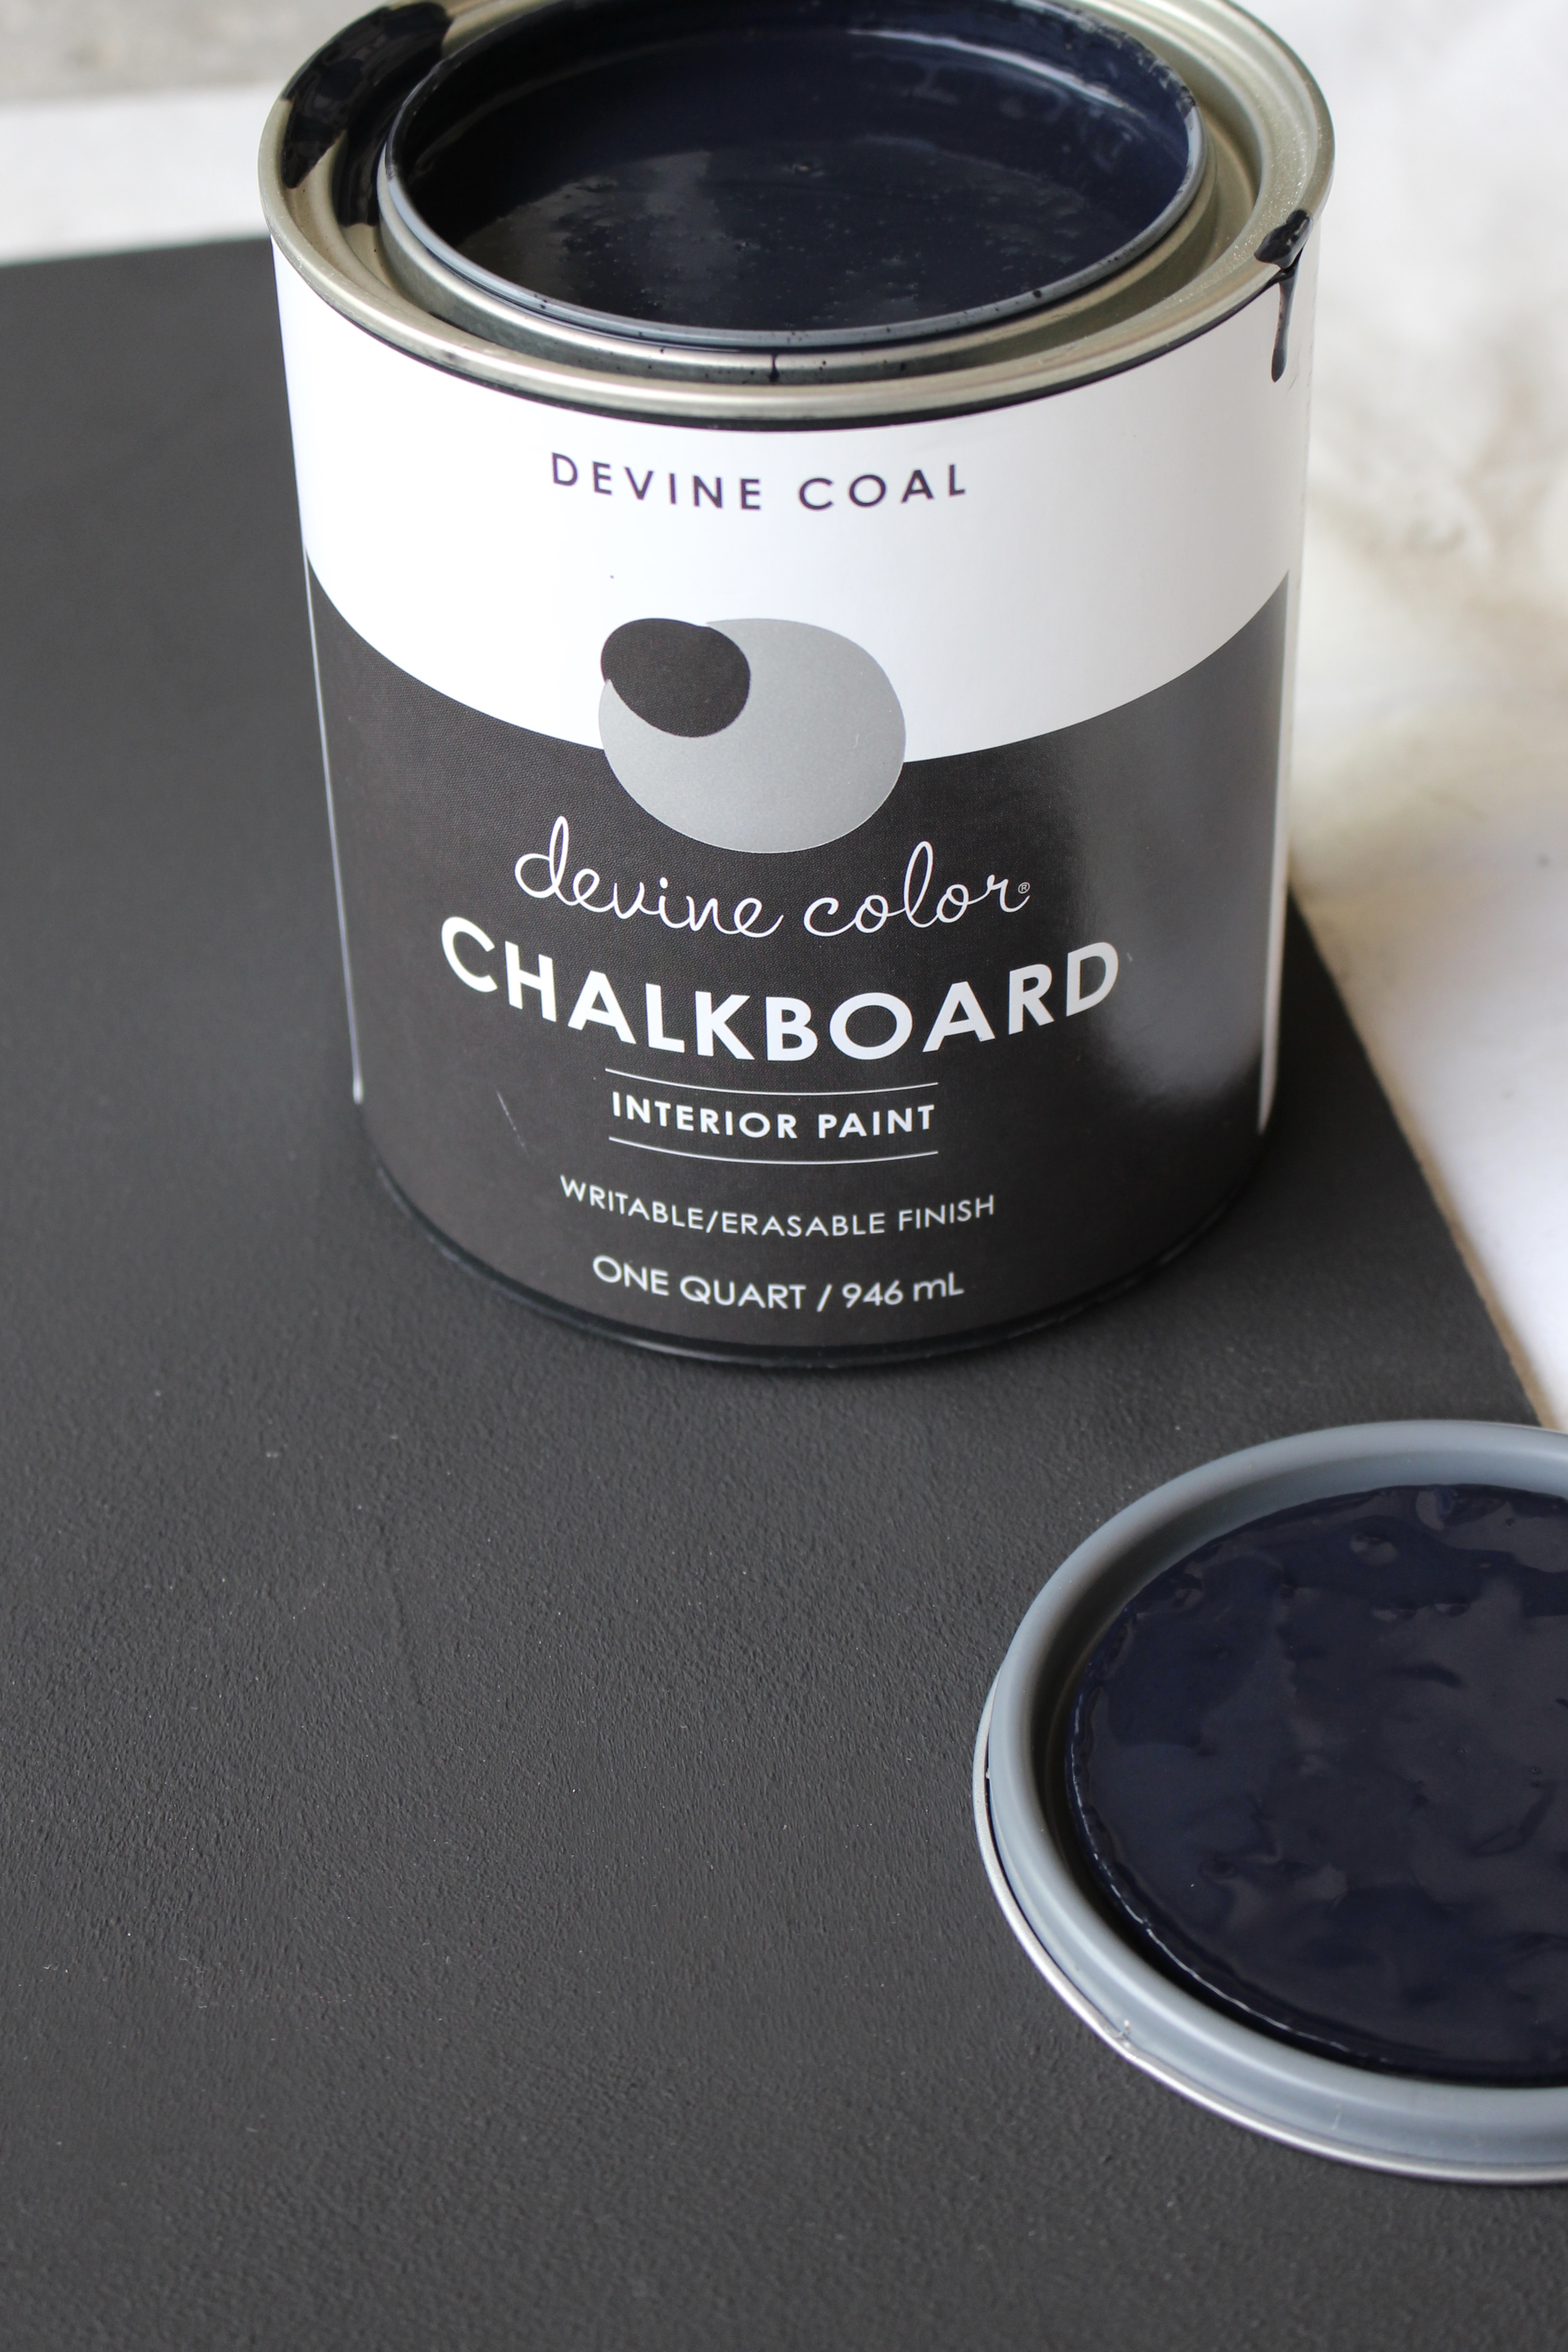 Farmhouse Chalkboard- Recycling a Vintage Frame into a Chalkboard- Vintage frame- Using a frame to make a chalkboard- chalkboard- Devine Color Paint- Making a chalkboard- chalkboard paint project- farmhouse style frame- DIY- Craft- white chalkboard- chalkboard art for summer